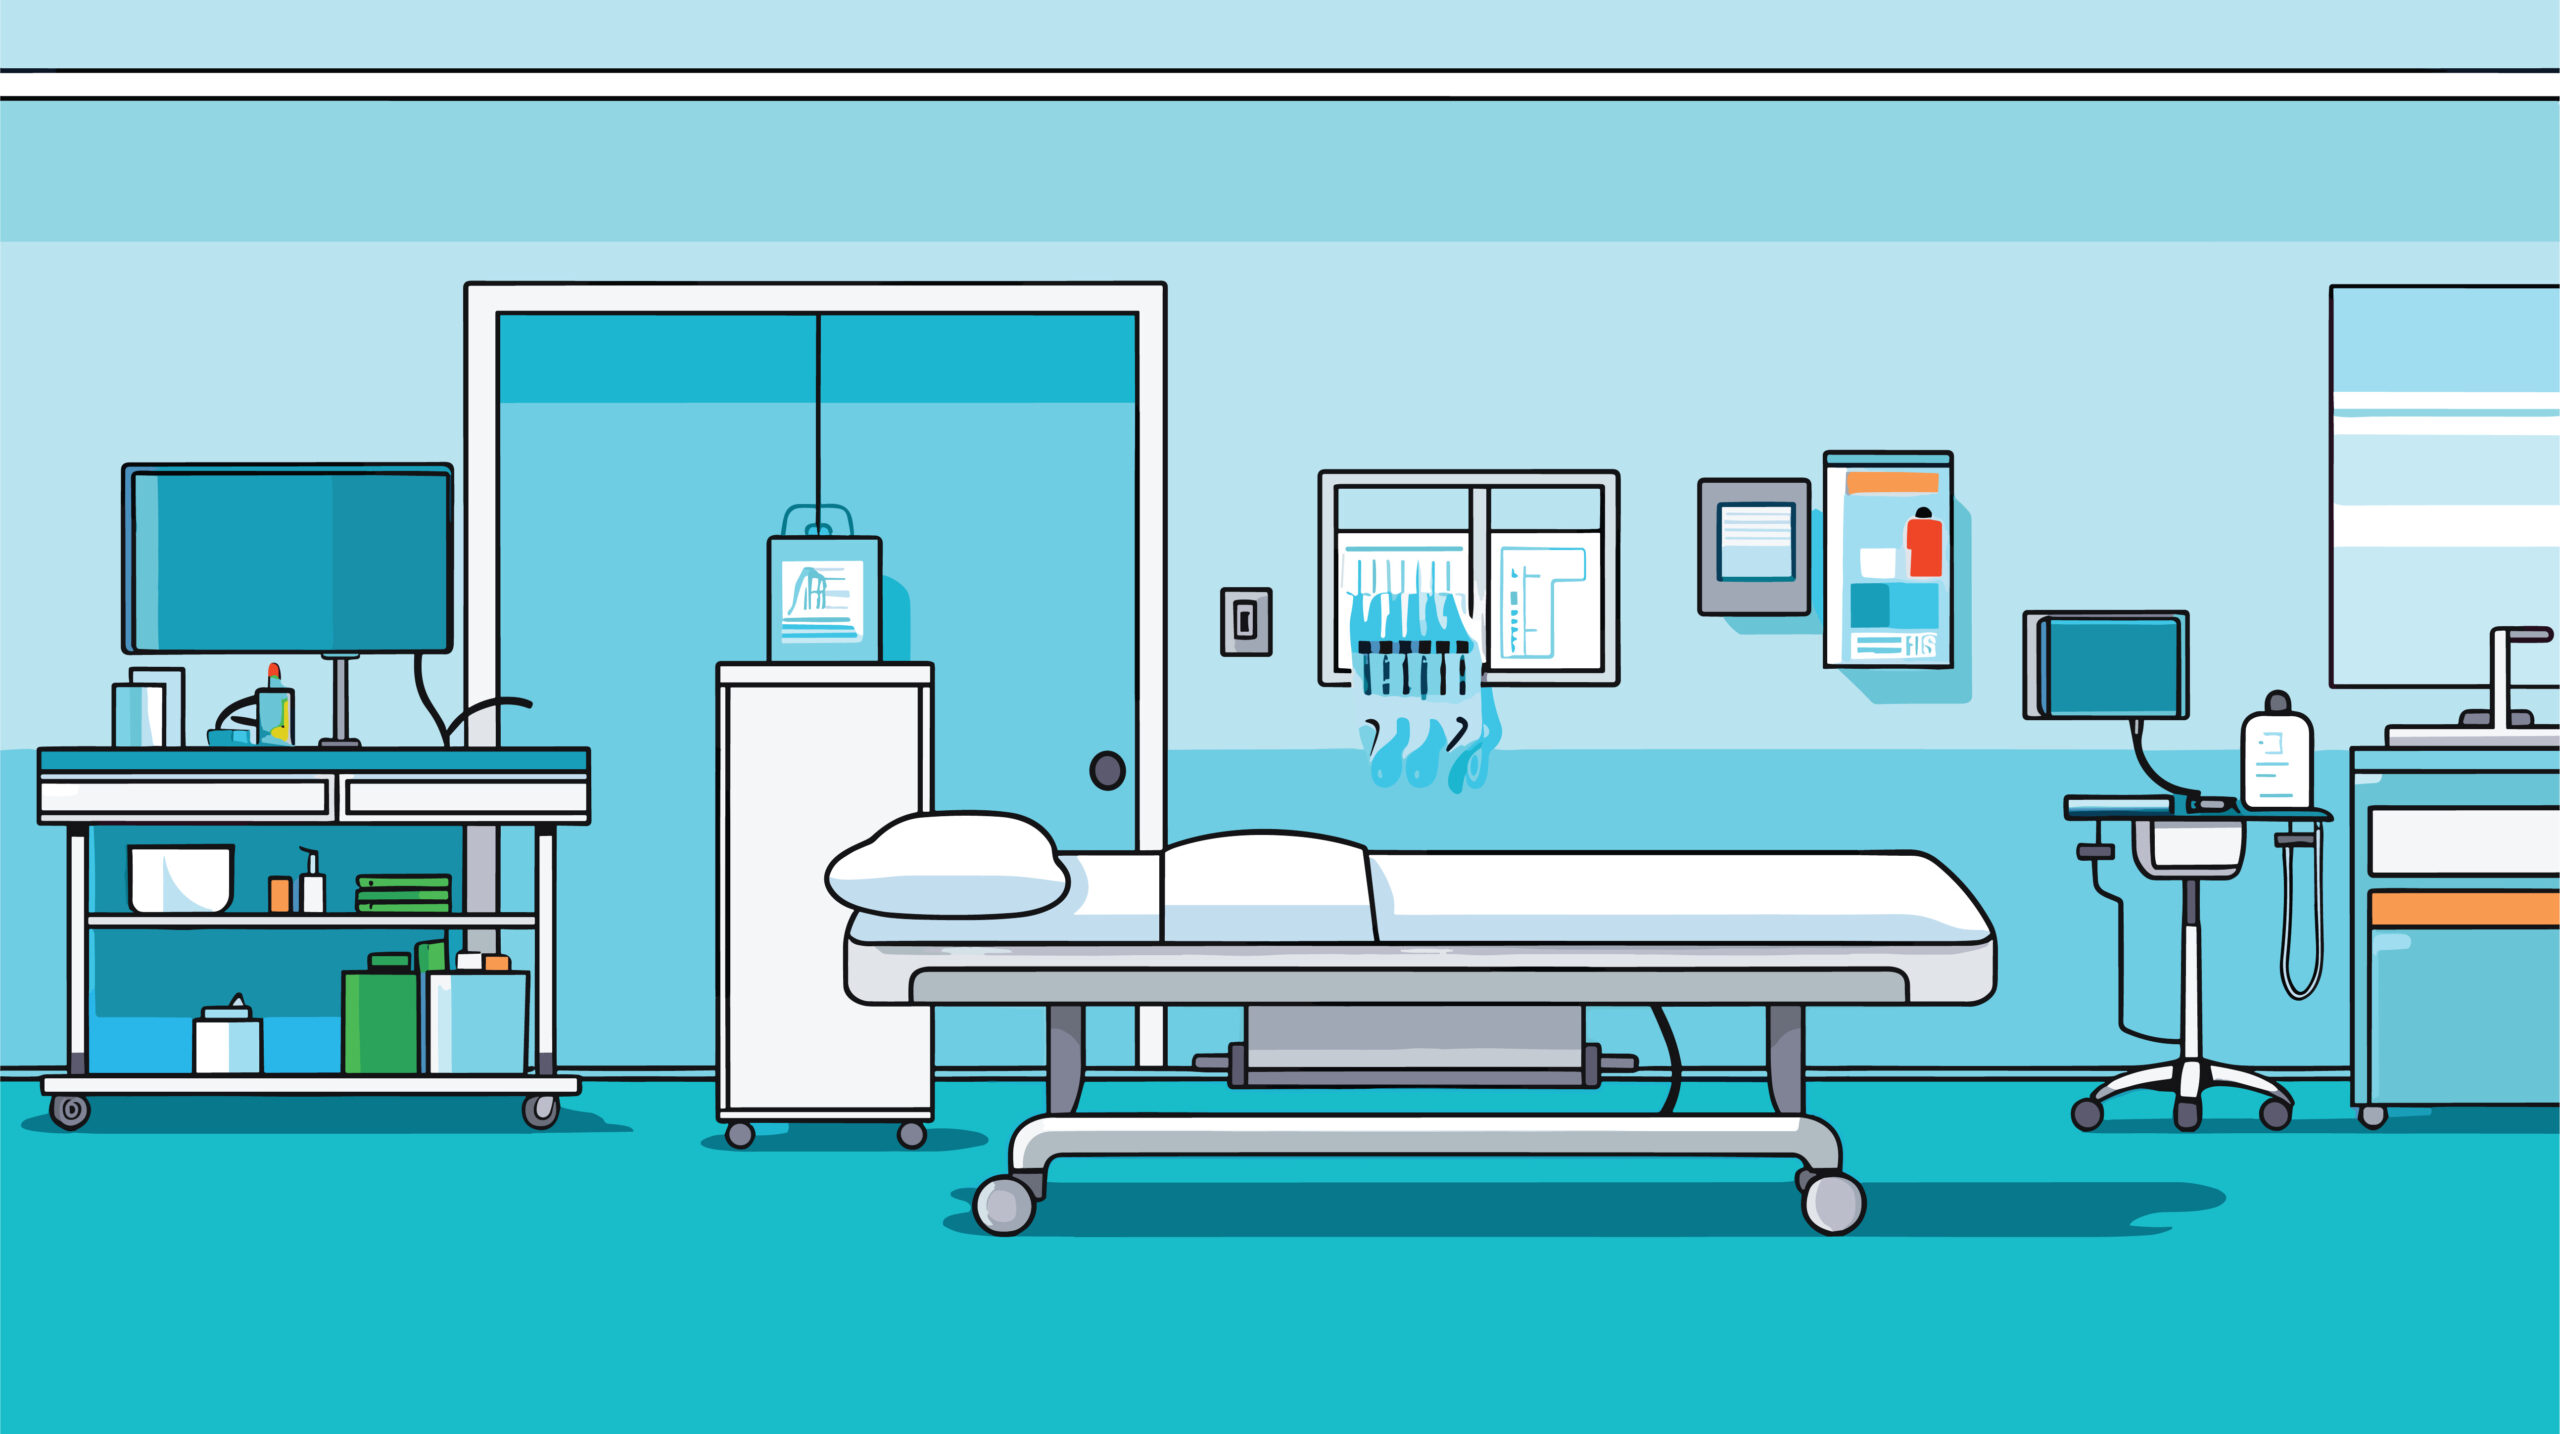 Modern hospital room illustration with a medical bed, various medical equipment, monitors, and medical supplies, showcasing a clean and organized healthcare setting.